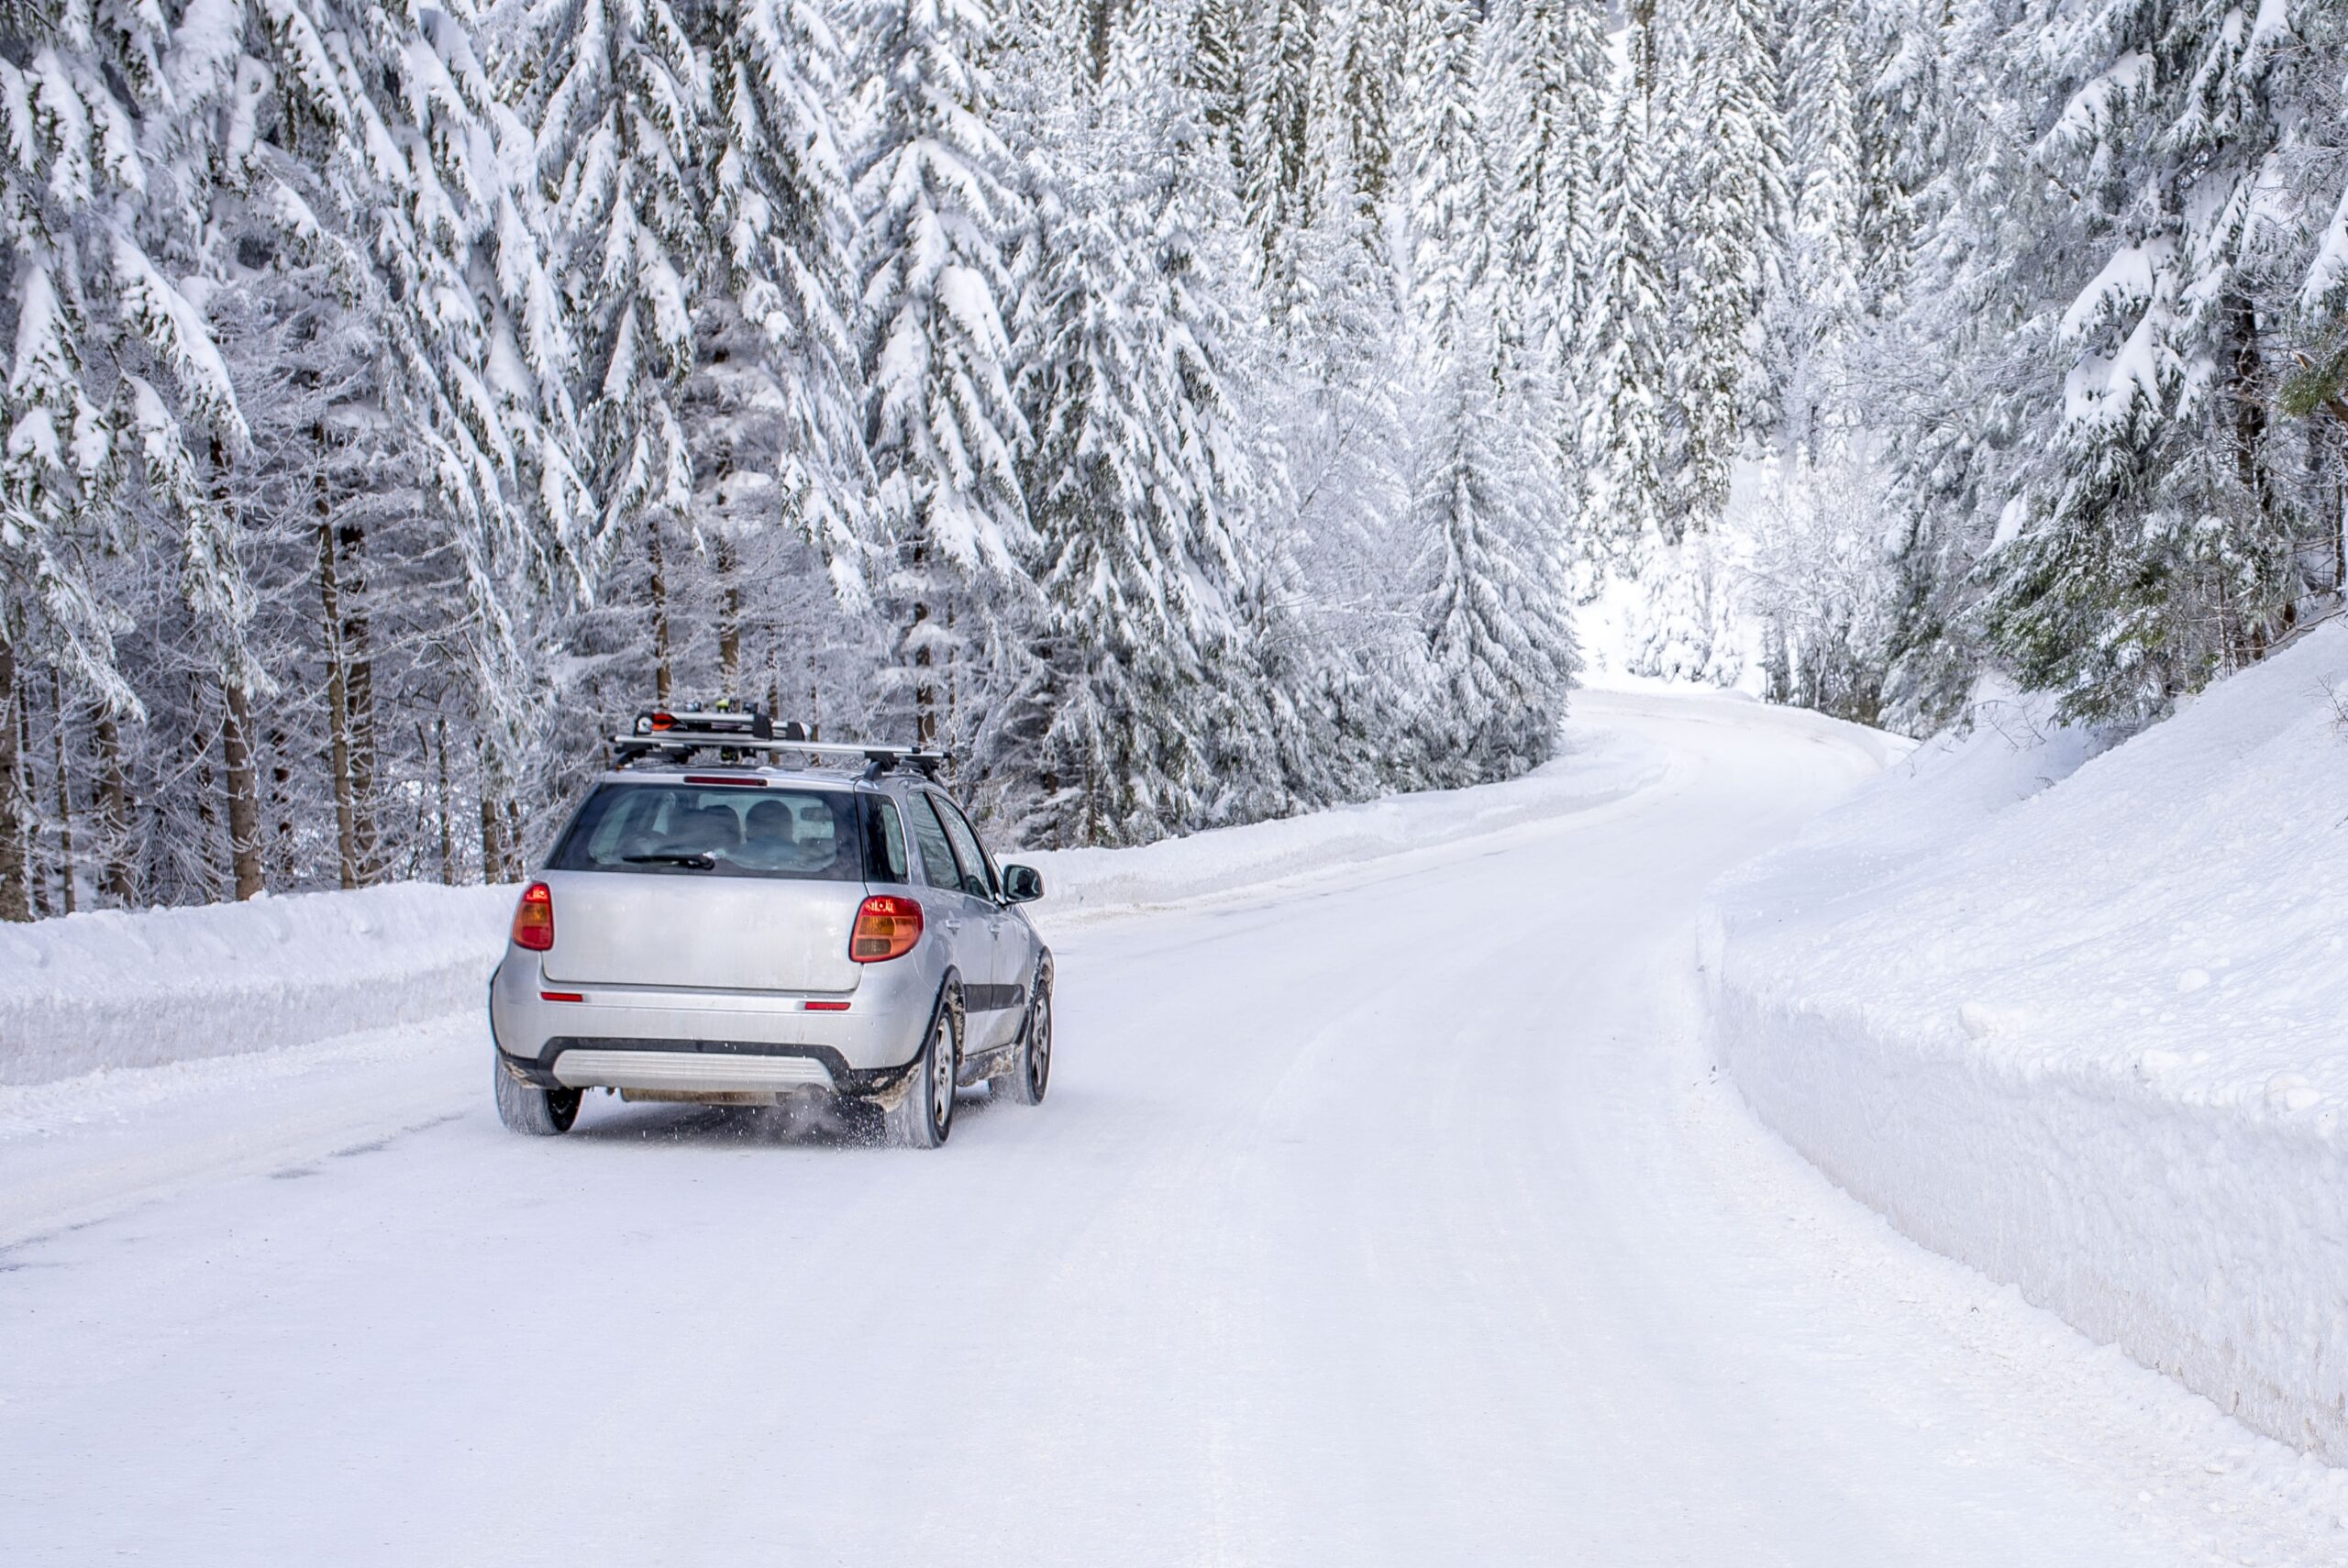 5 Essential Types Of Driveway Markers For Winter Safety